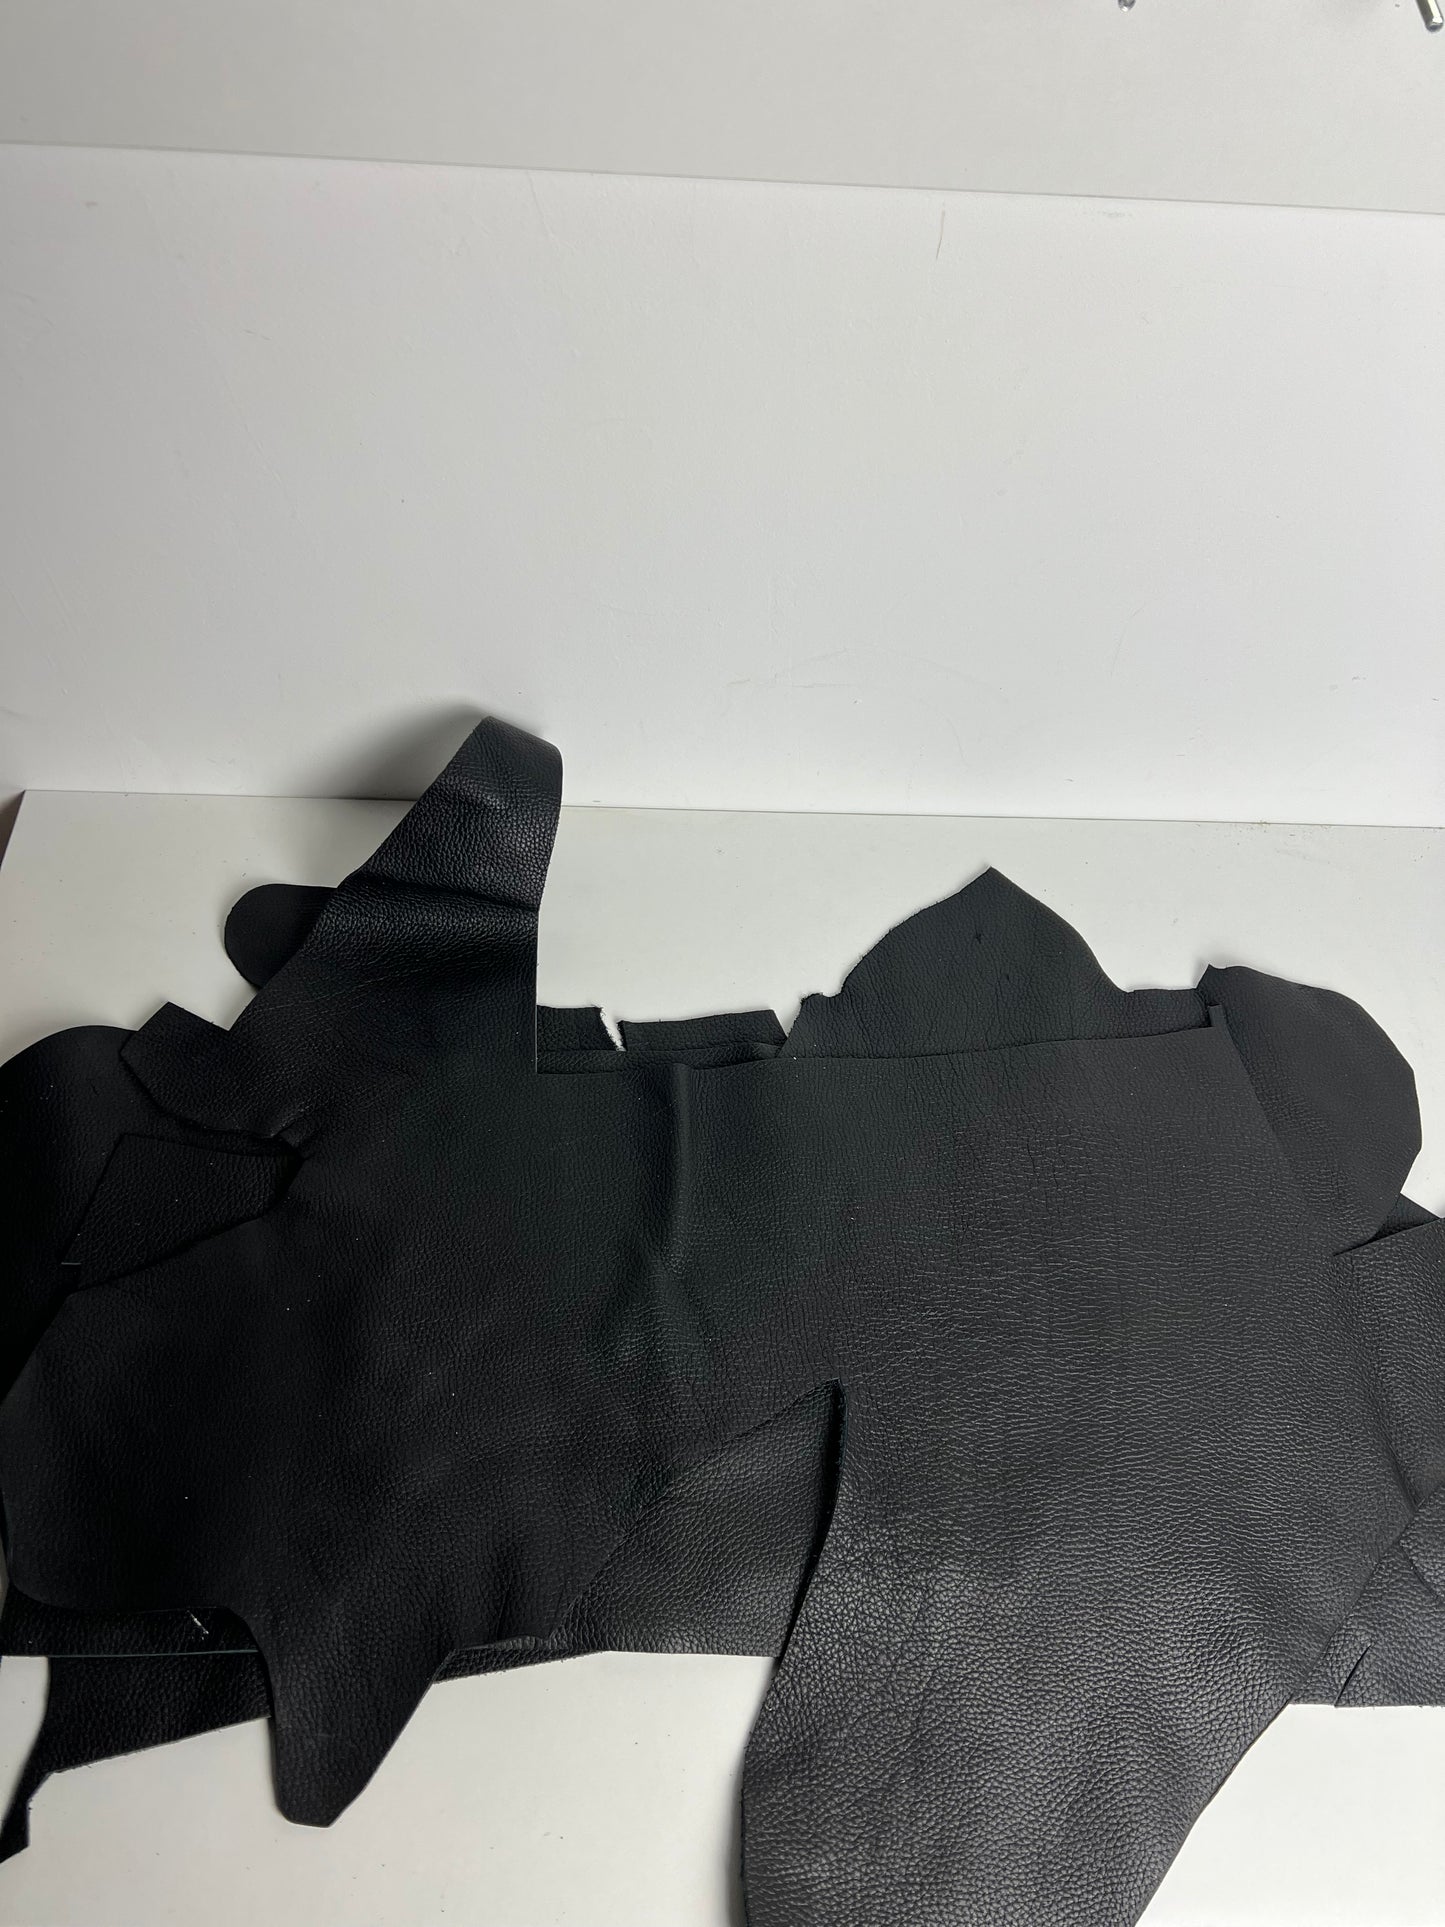 Pieces of Leather, Medium and Large pieces, Color Black, Cow, Nice finish look | 0.8 kg  | 1.8 lb